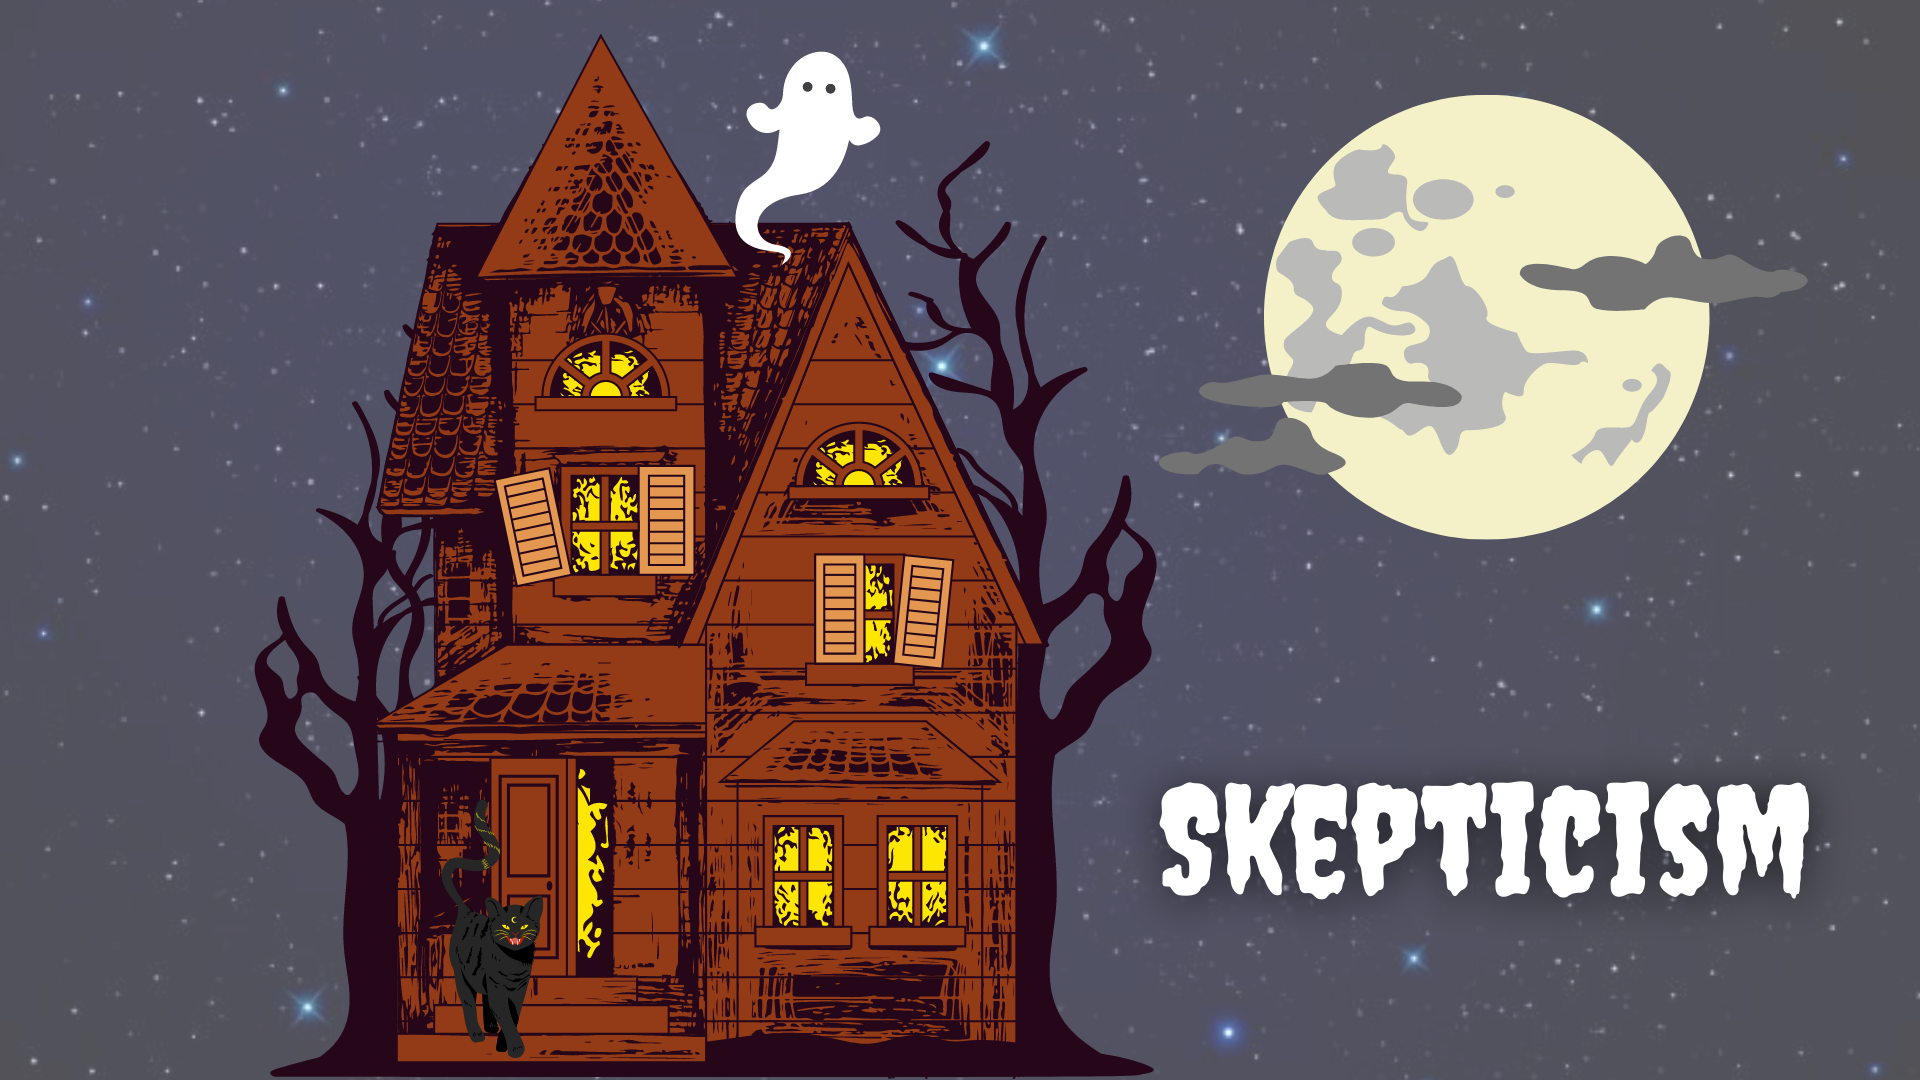 Haunted house at night with ghost, skepticism is a tool that protects us from being fooled